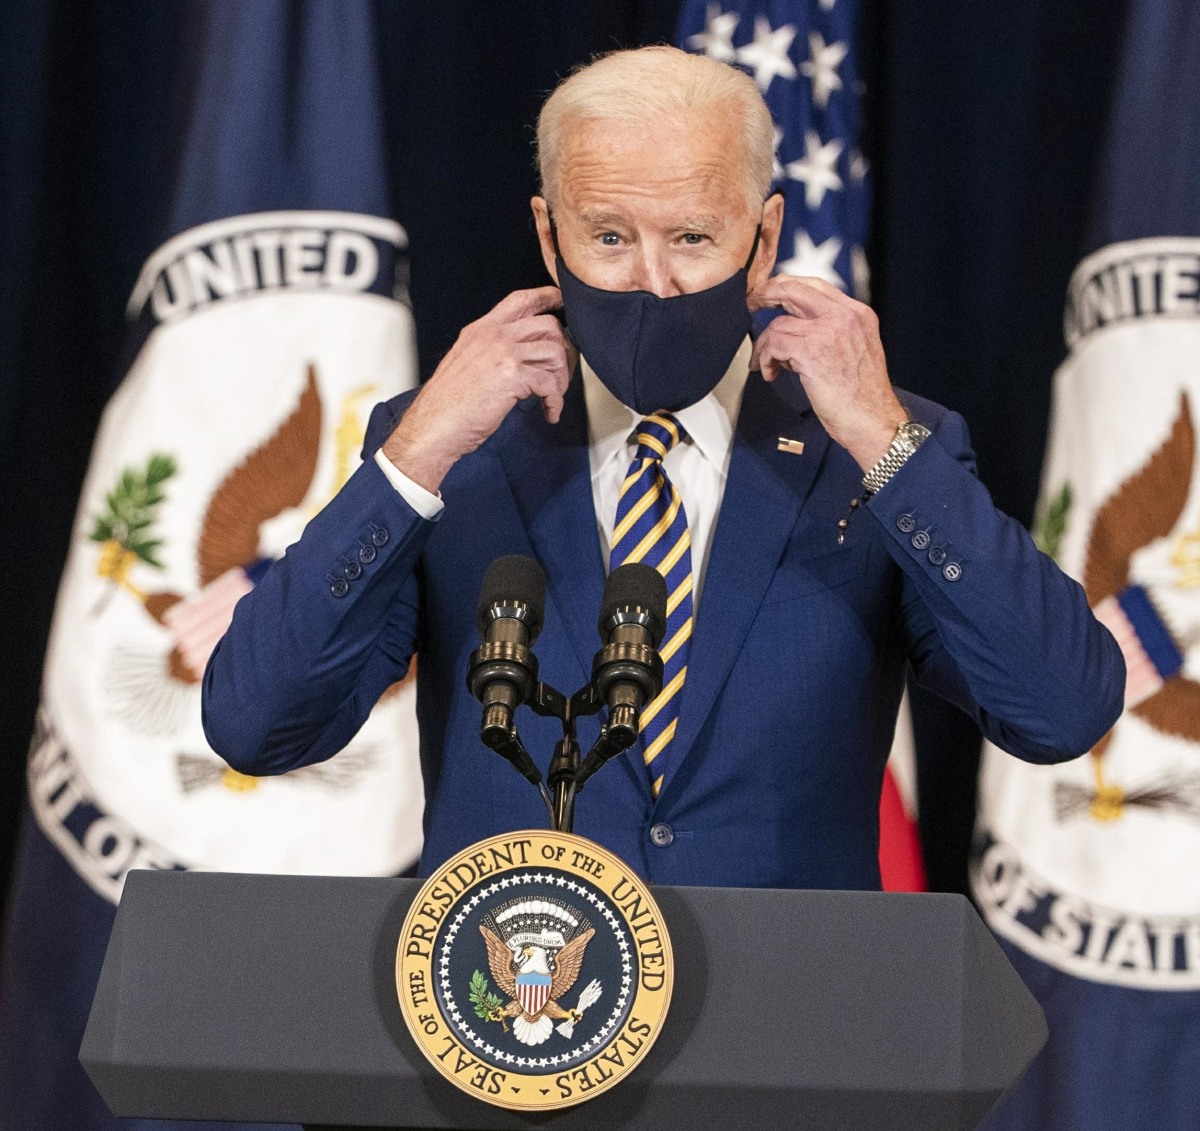 Biden Visits the Department of State